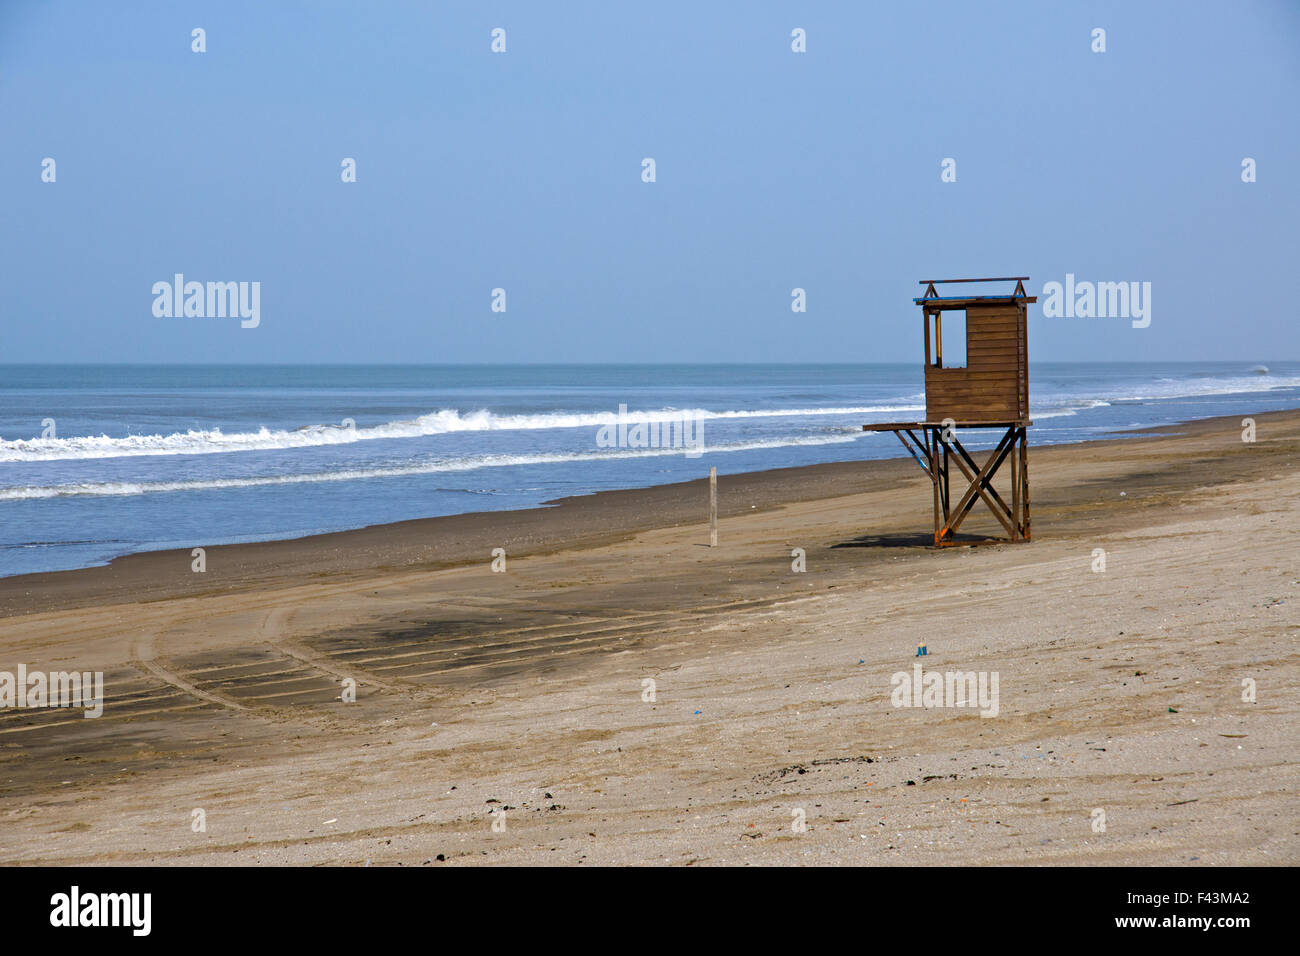 An empty beach in Villa Gesell at the argentinean atlantic coast Stock Photo